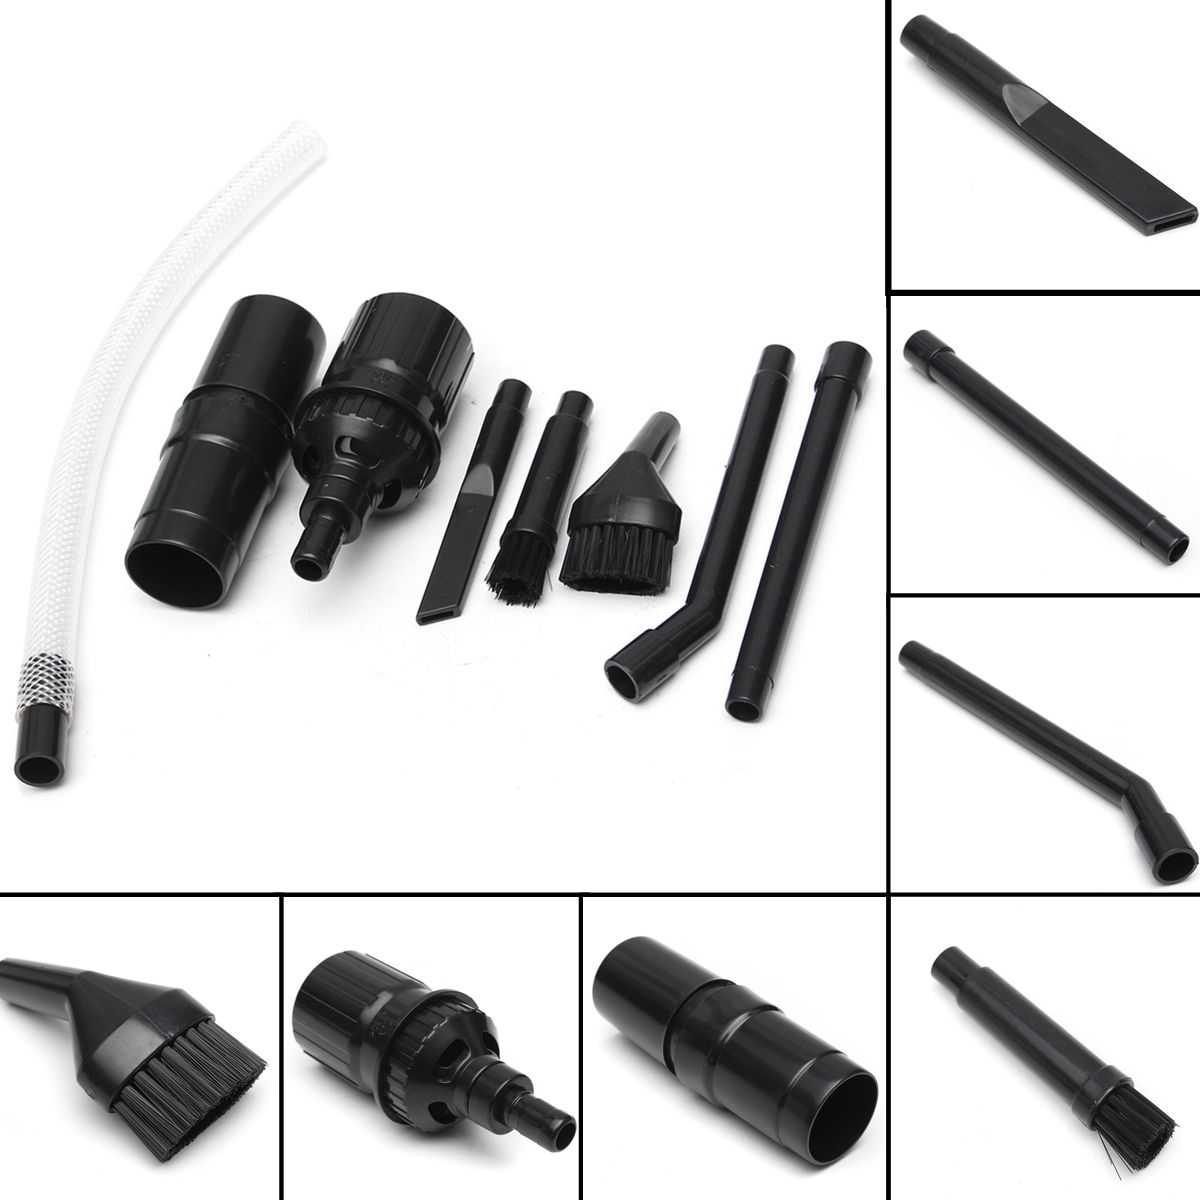 8Pcs-Micro-Cleaning-Tool-Kit-Universal-Vacuum-Cleaner-Attachments-Accessories-Brush-Tool-1219554